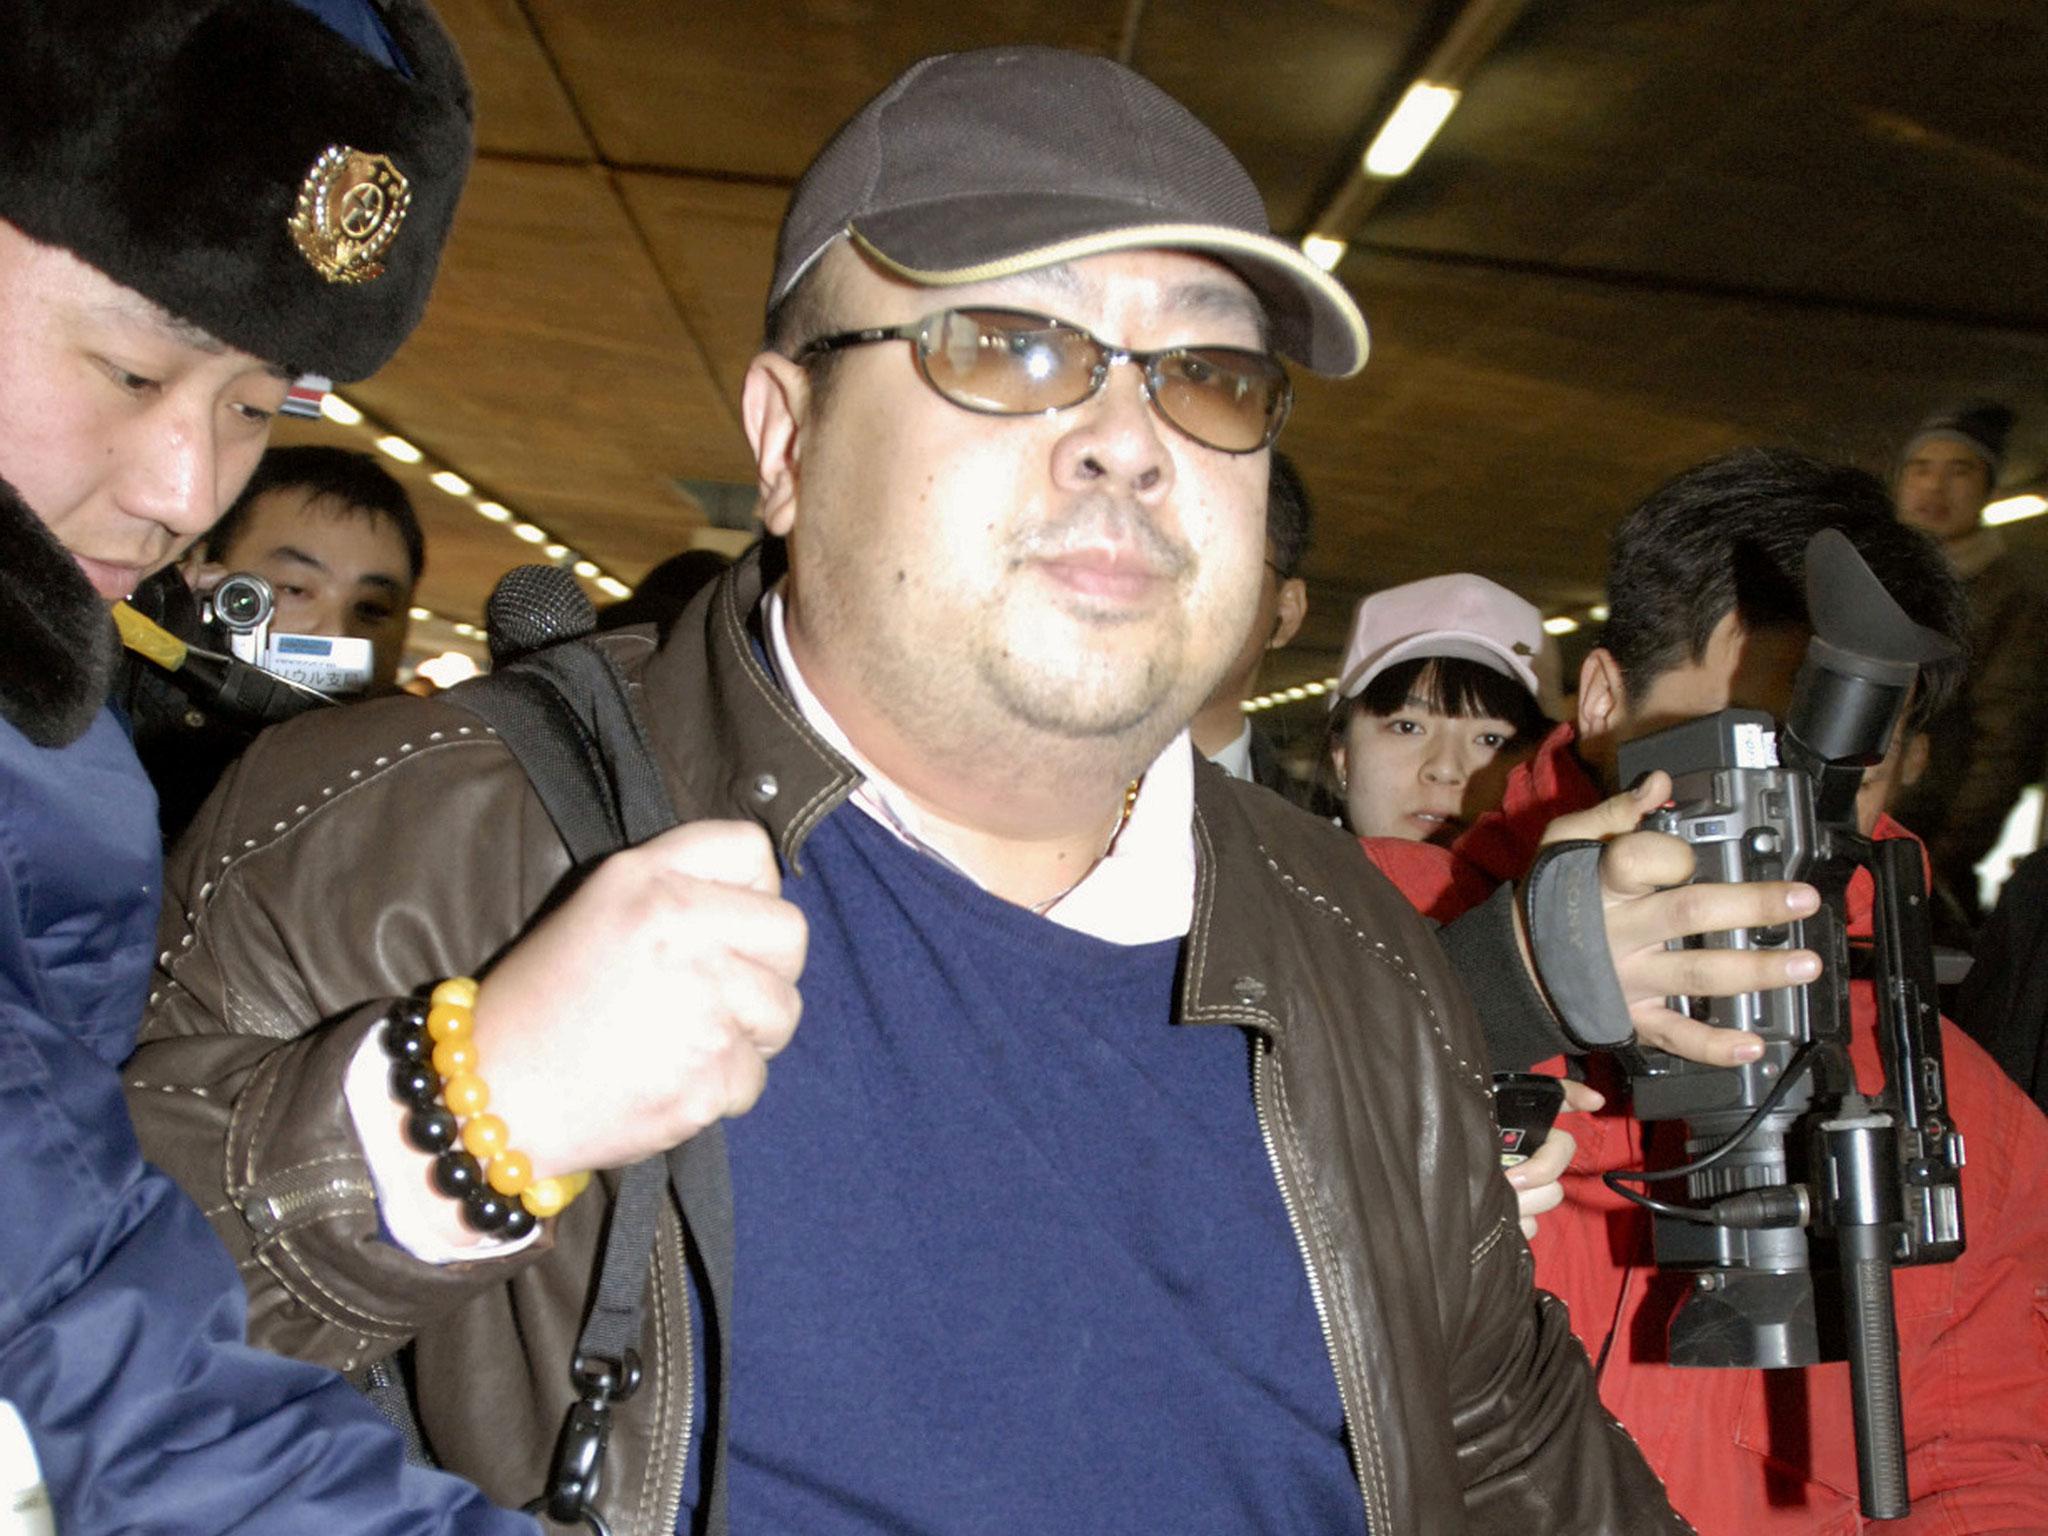 Kim Jong-nam was killed walking through the airport on 13 February